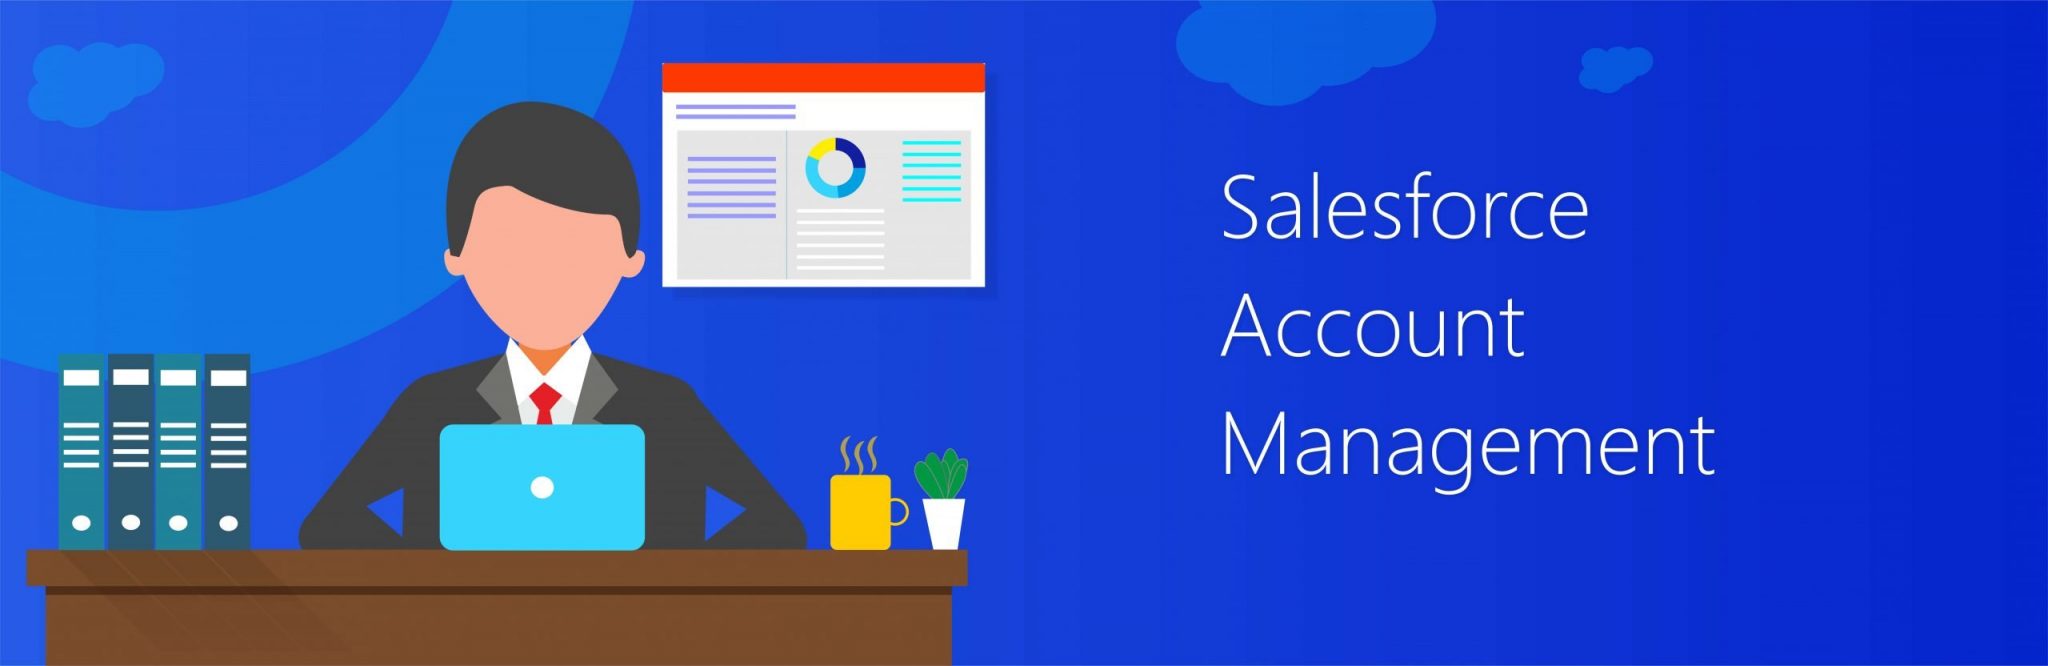 Salesforce-Account-Management-scaled-1-2048x666